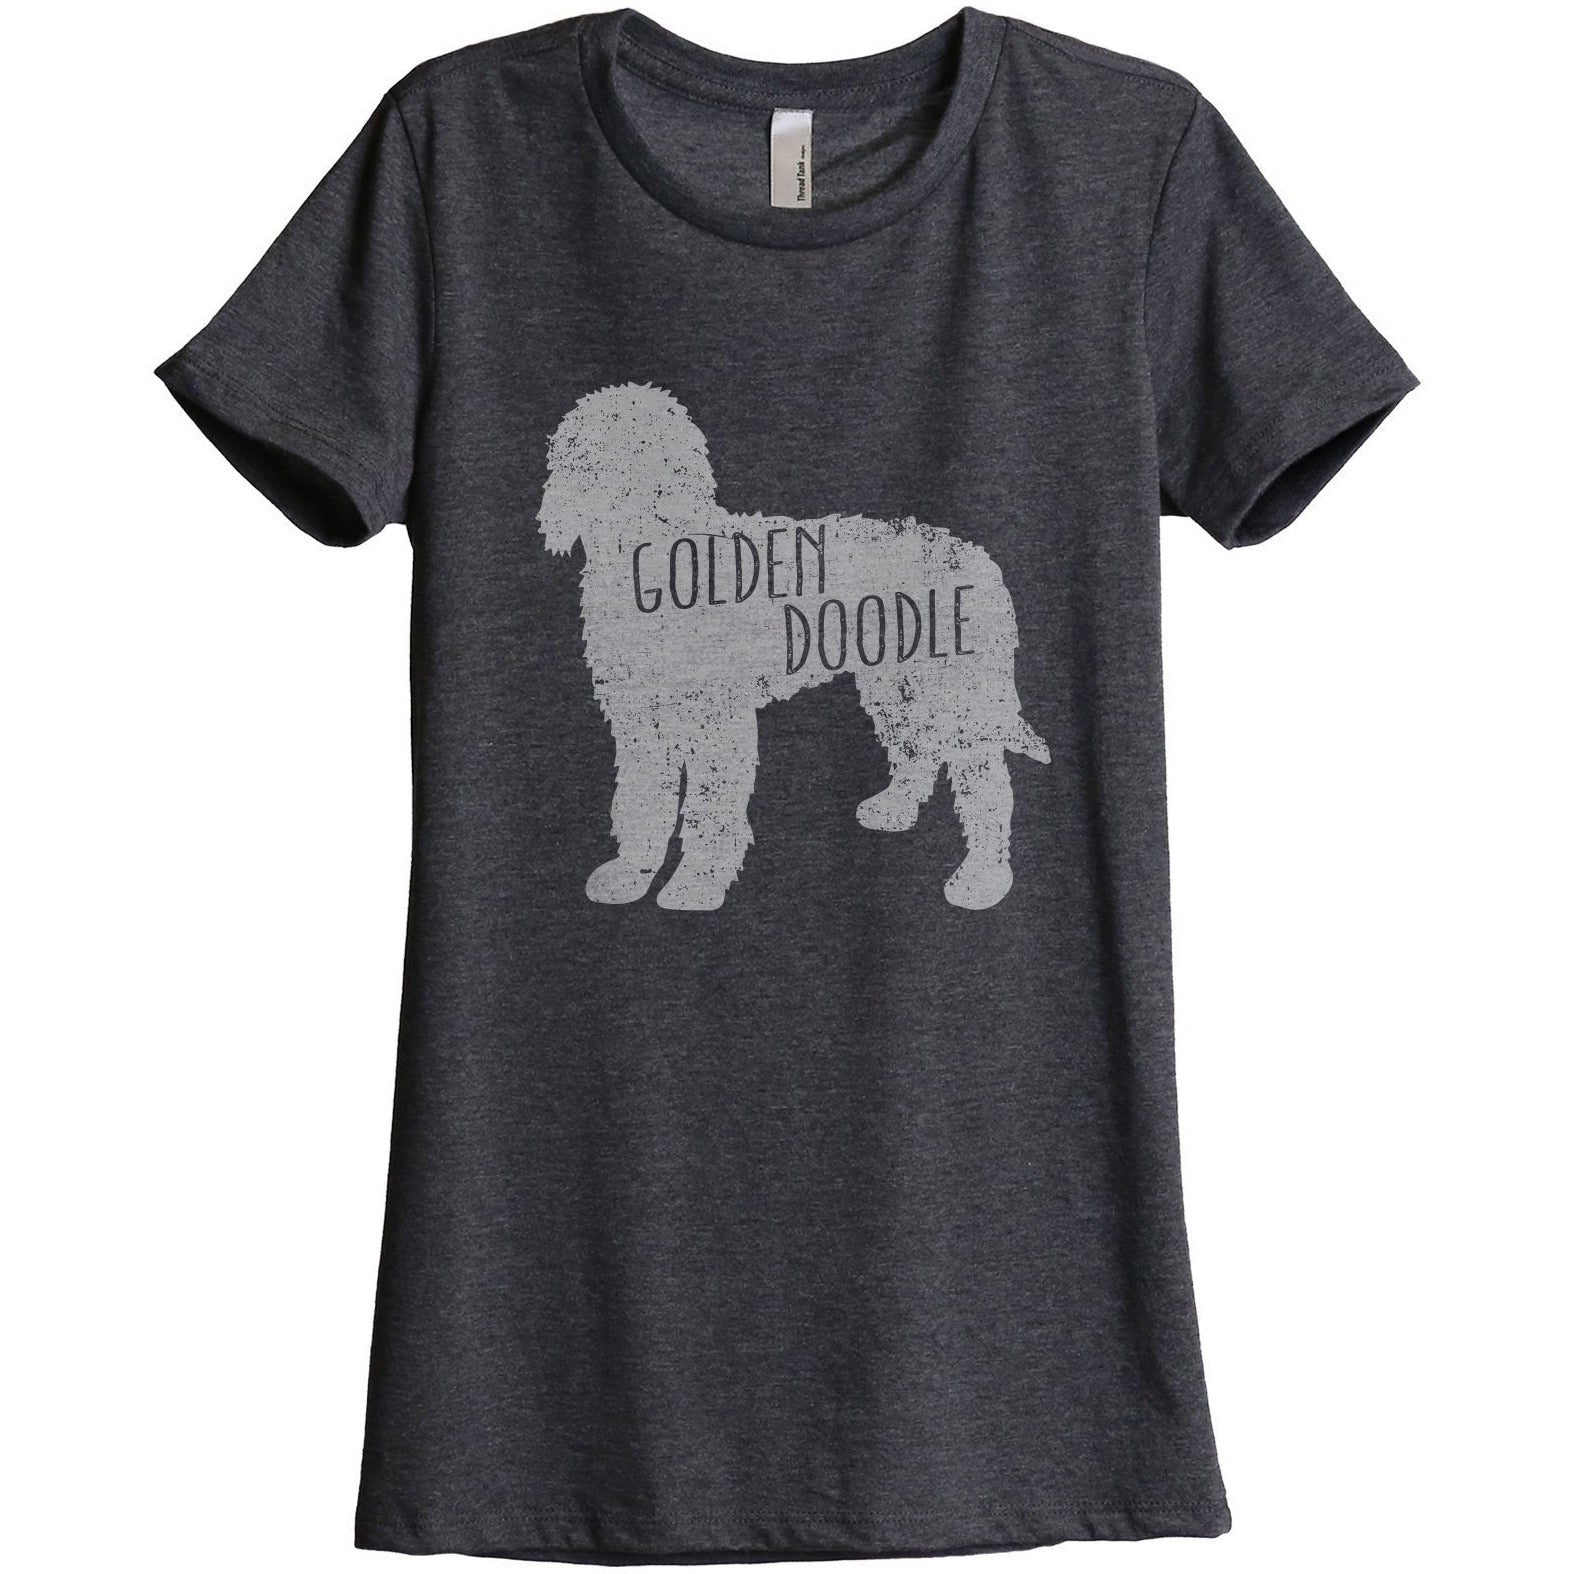 Golden Doodle Silhouette Women's Relaxed Crewneck T-Shirt Top Tee Charcoal Grey
